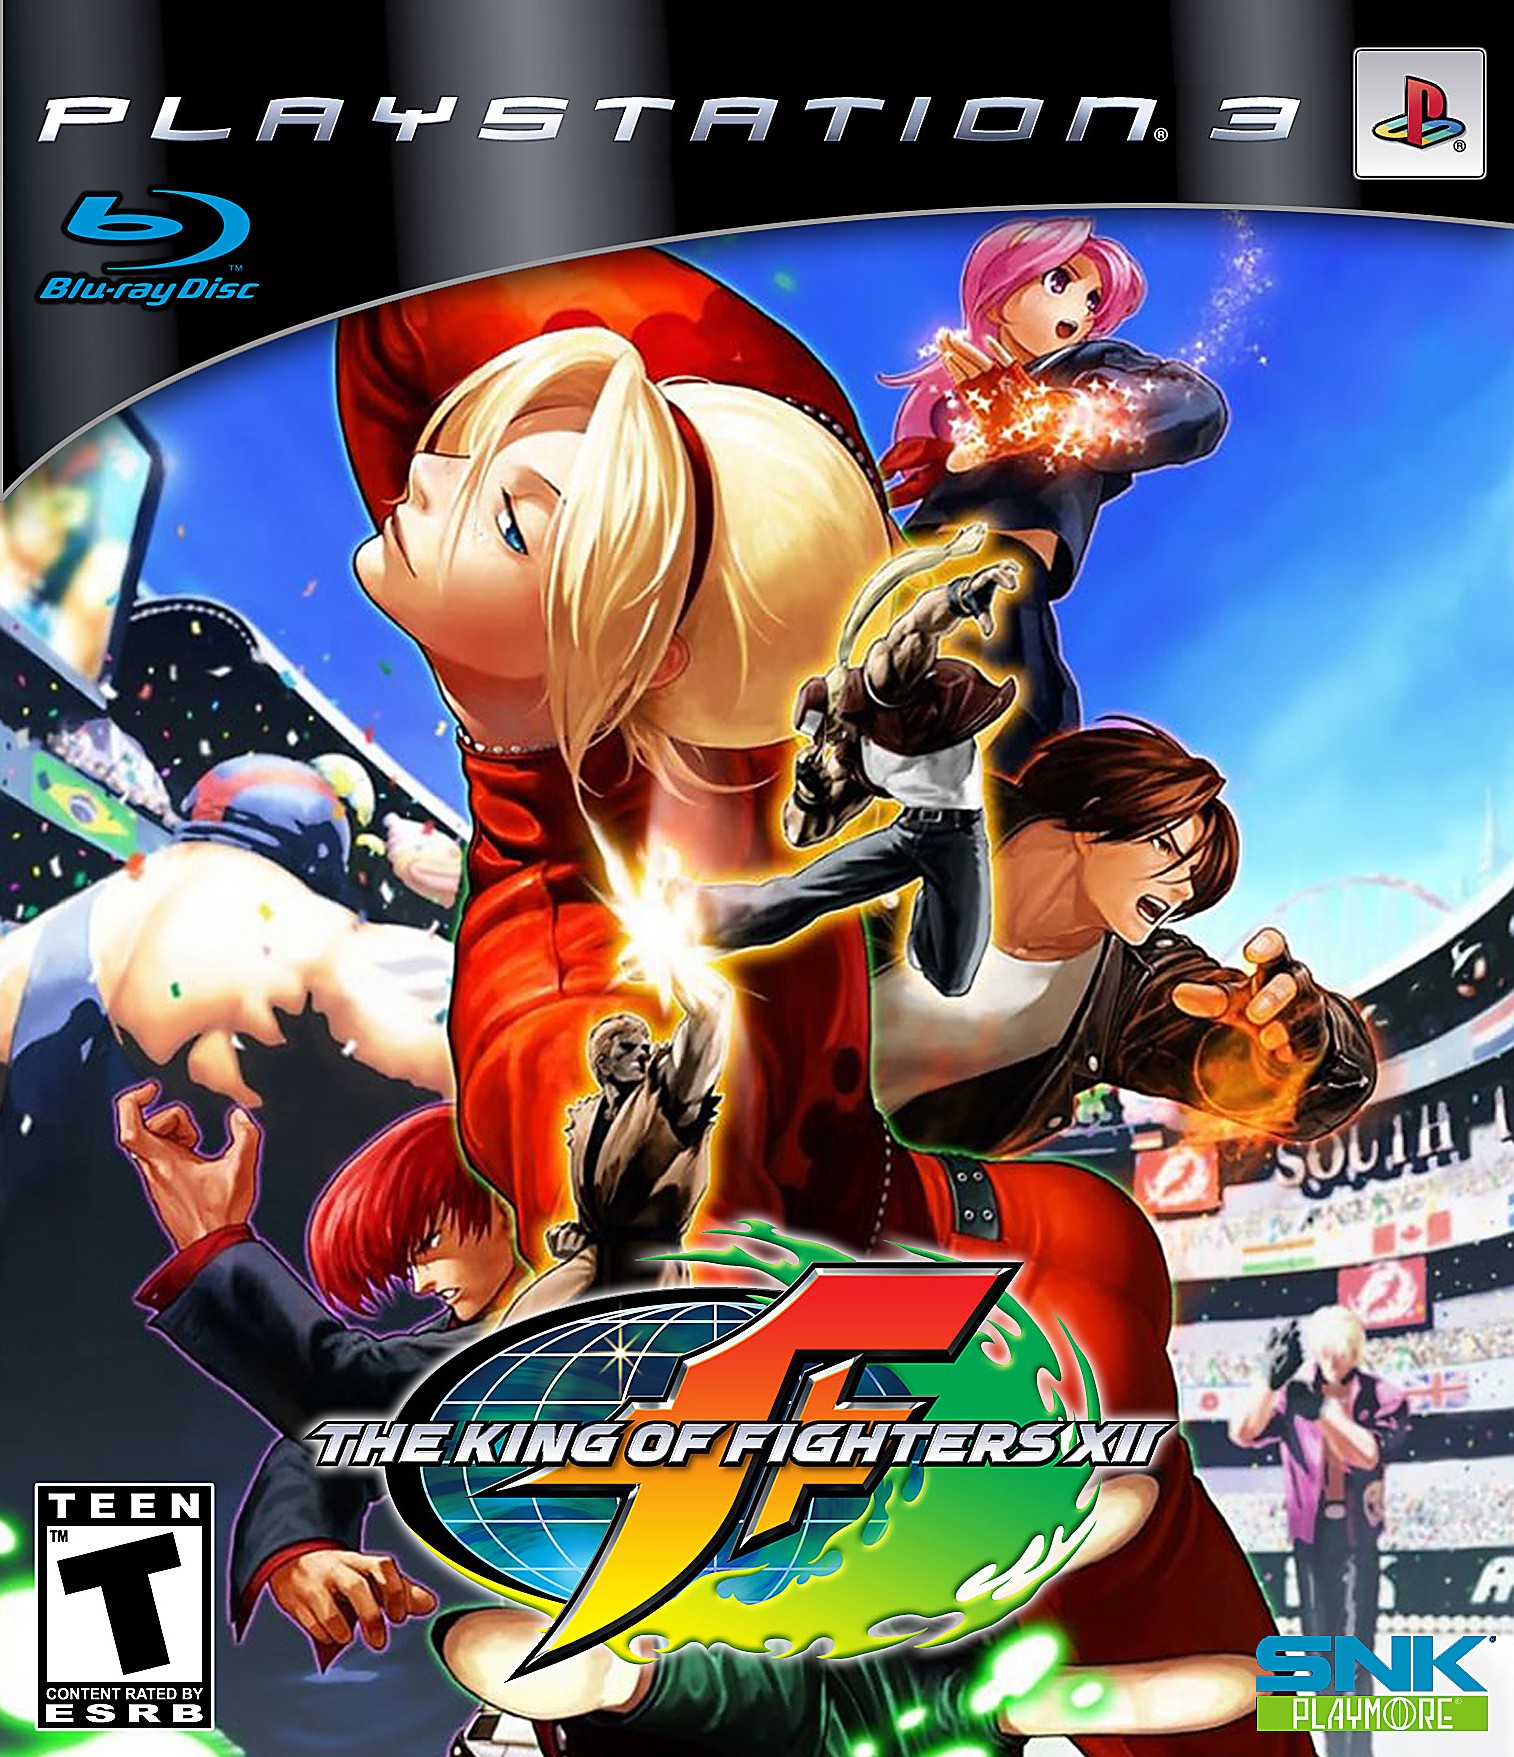 'King of Fighters: XII'